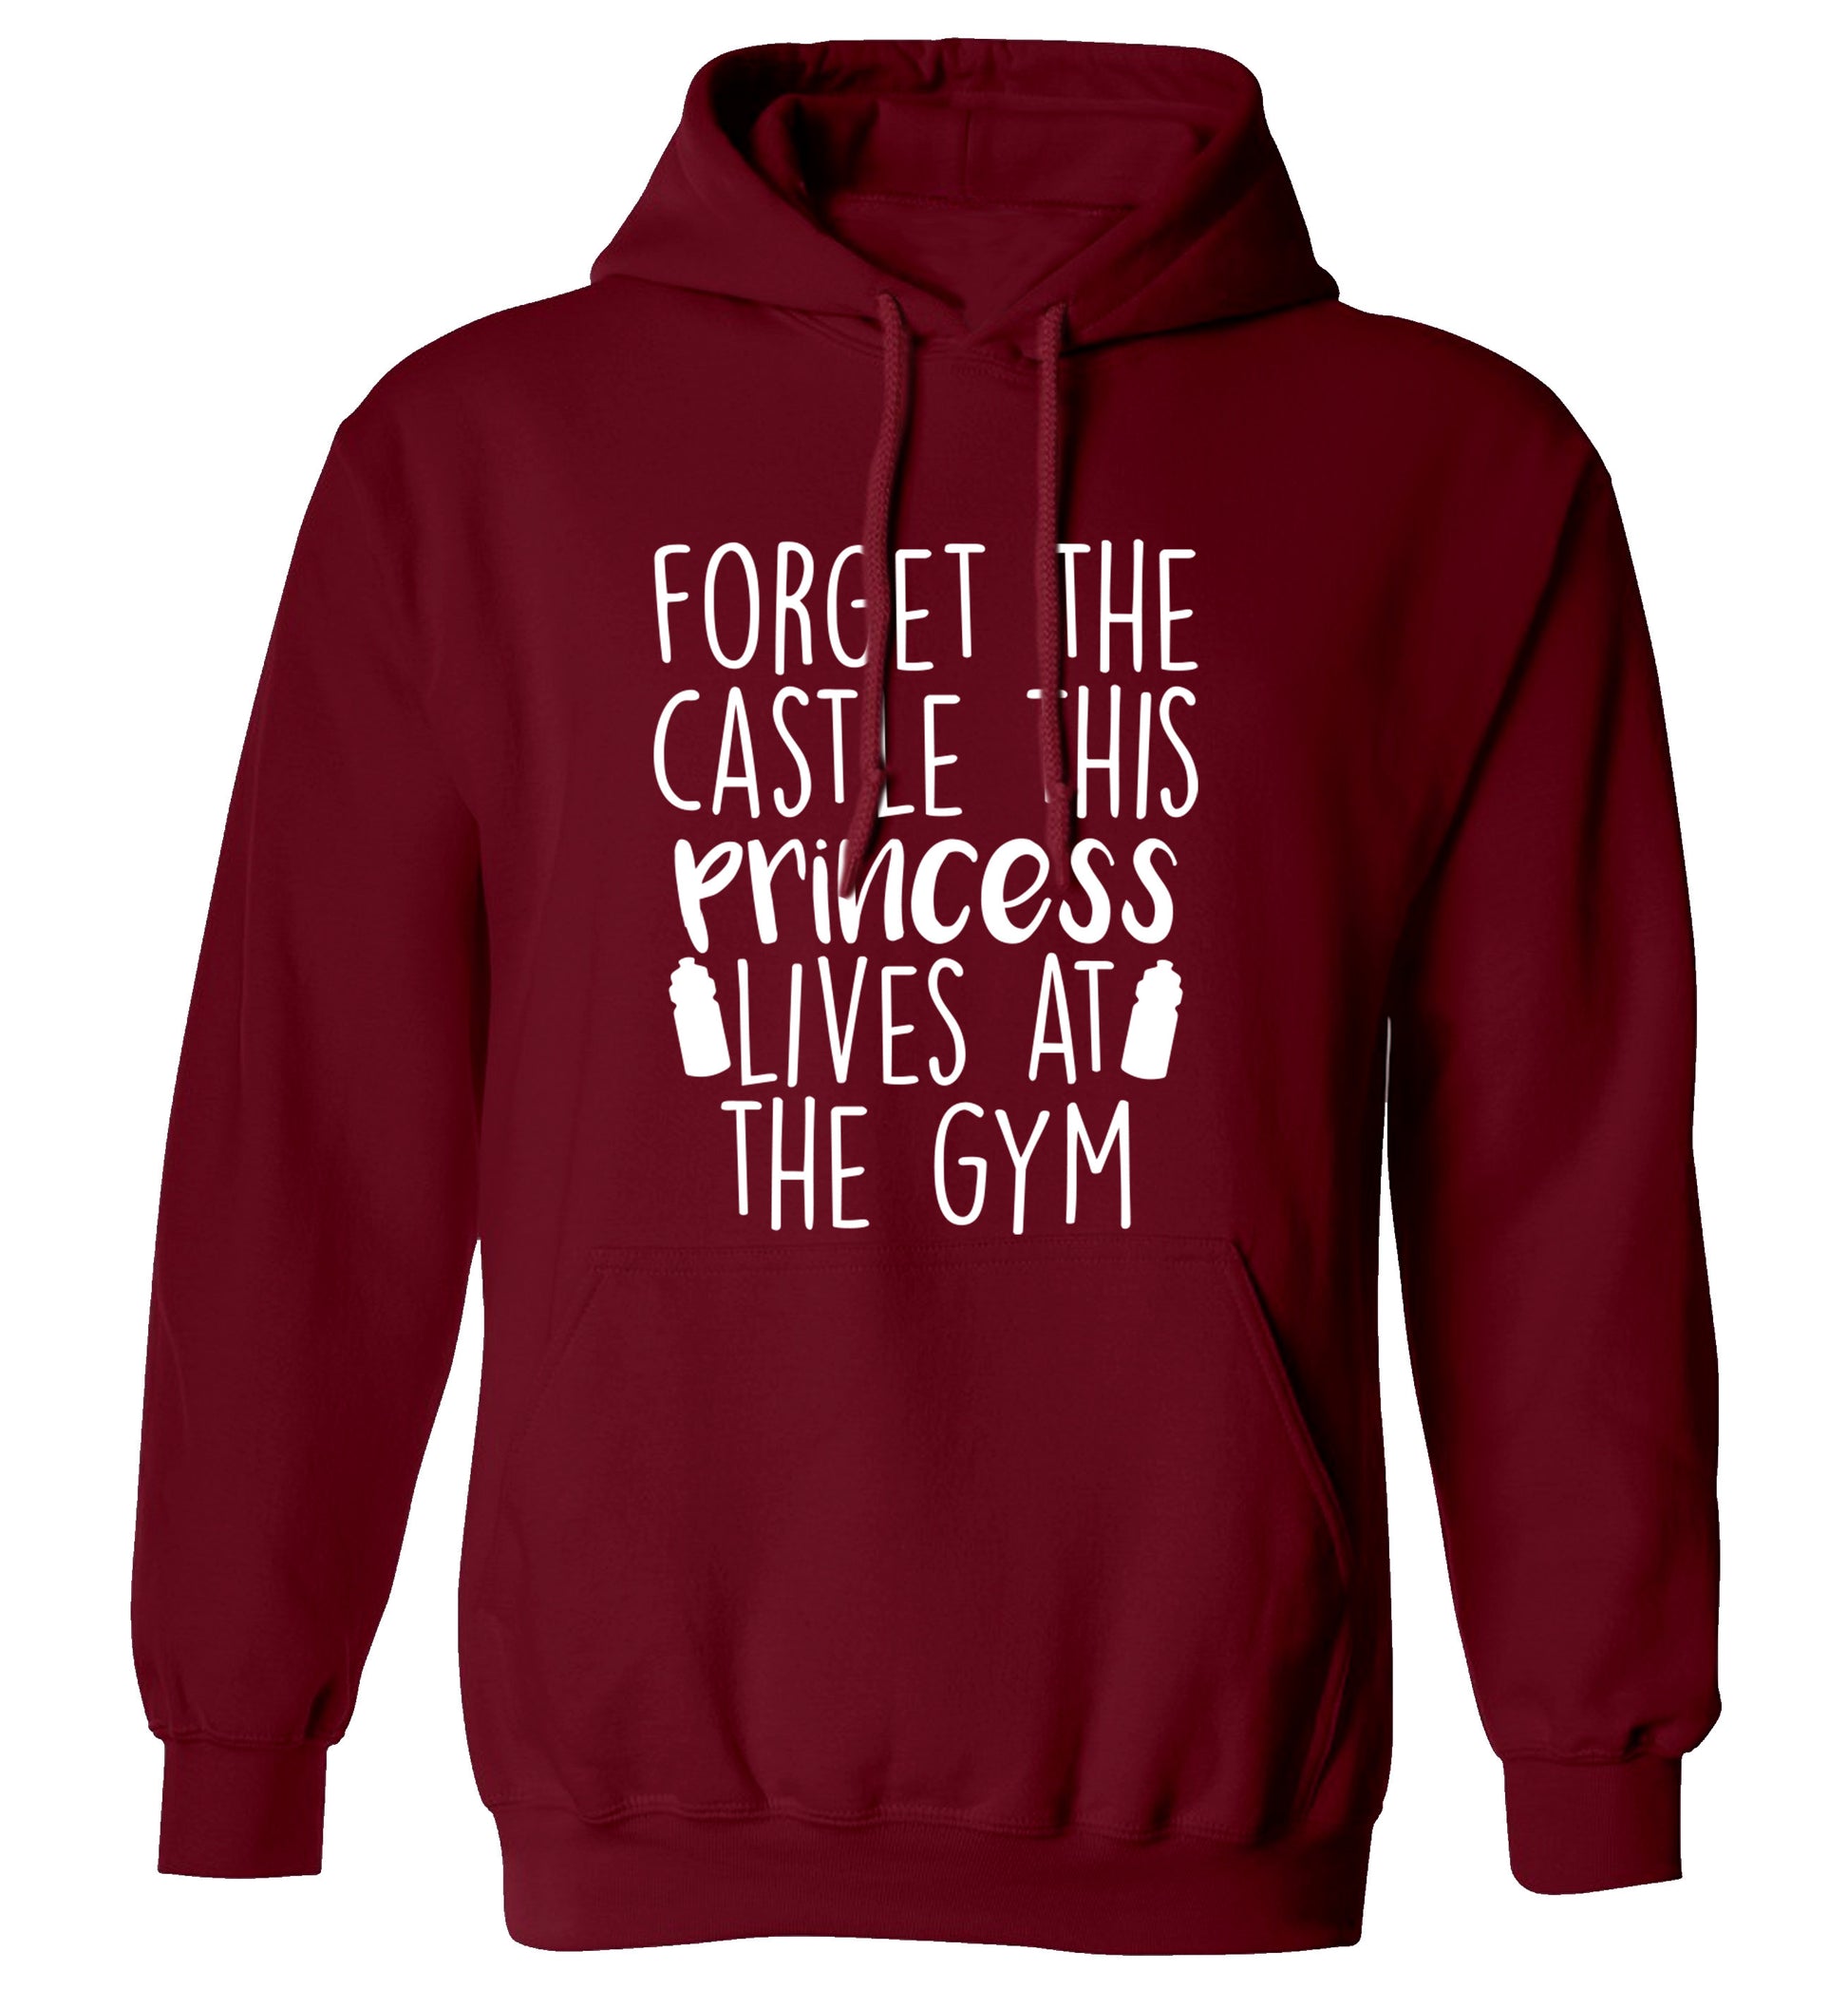 Forget the castle this princess lives at the gym adults unisex maroon hoodie 2XL